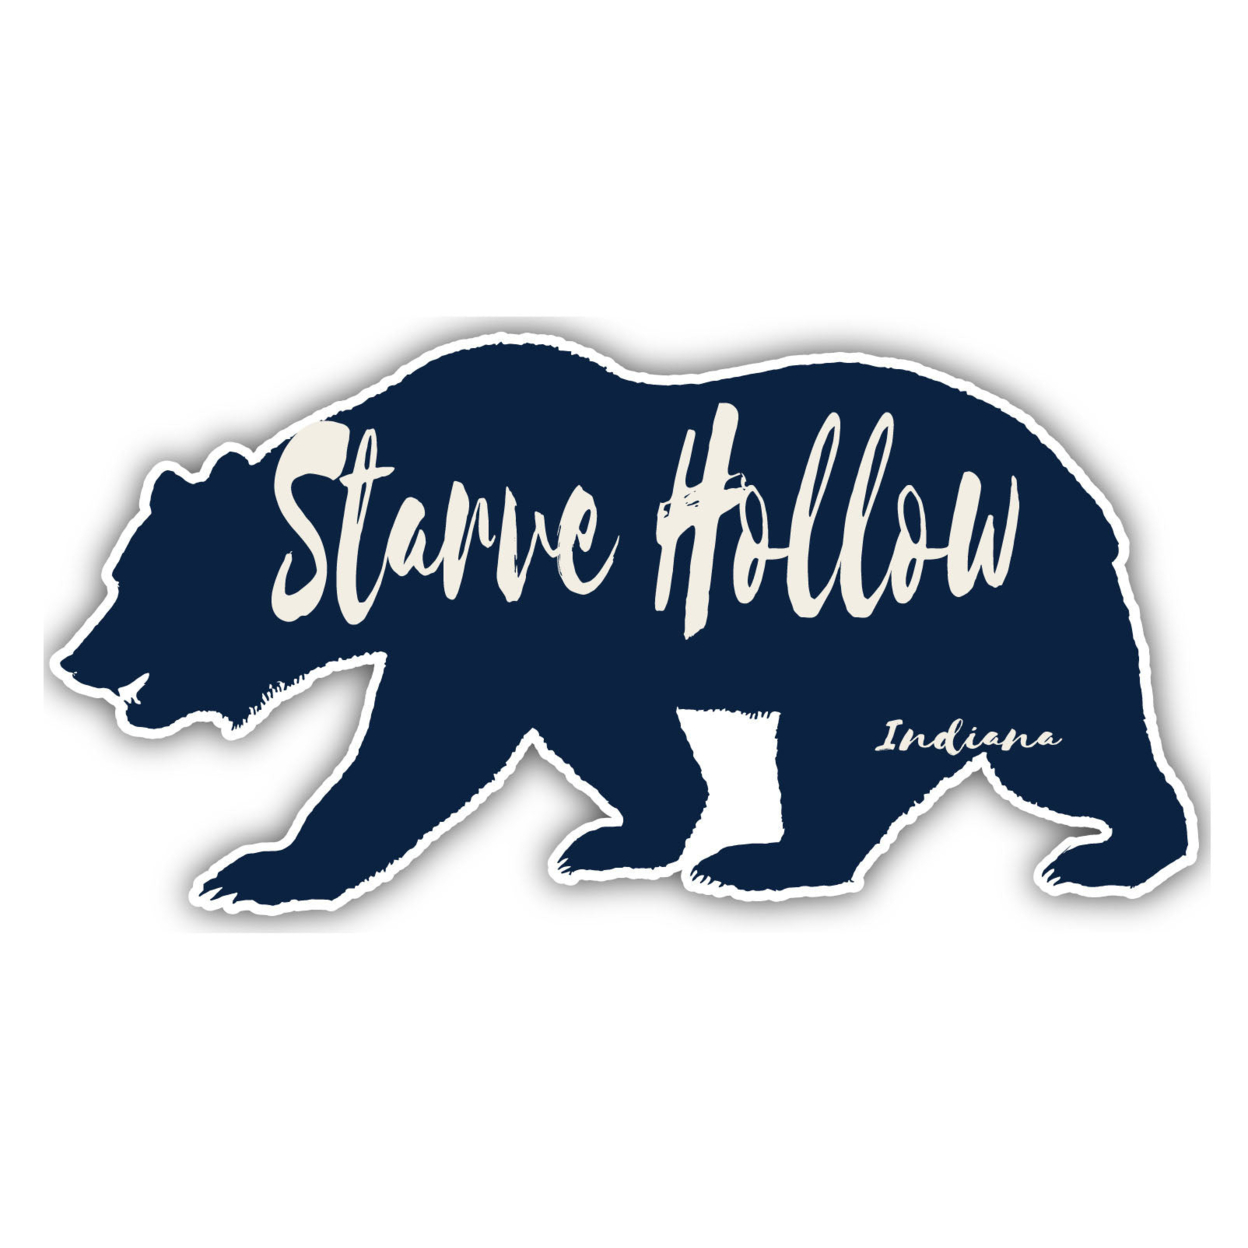 Starve Hollow Indiana Souvenir Decorative Stickers (Choose Theme And Size) - Single Unit, 4-Inch, Great Outdoors